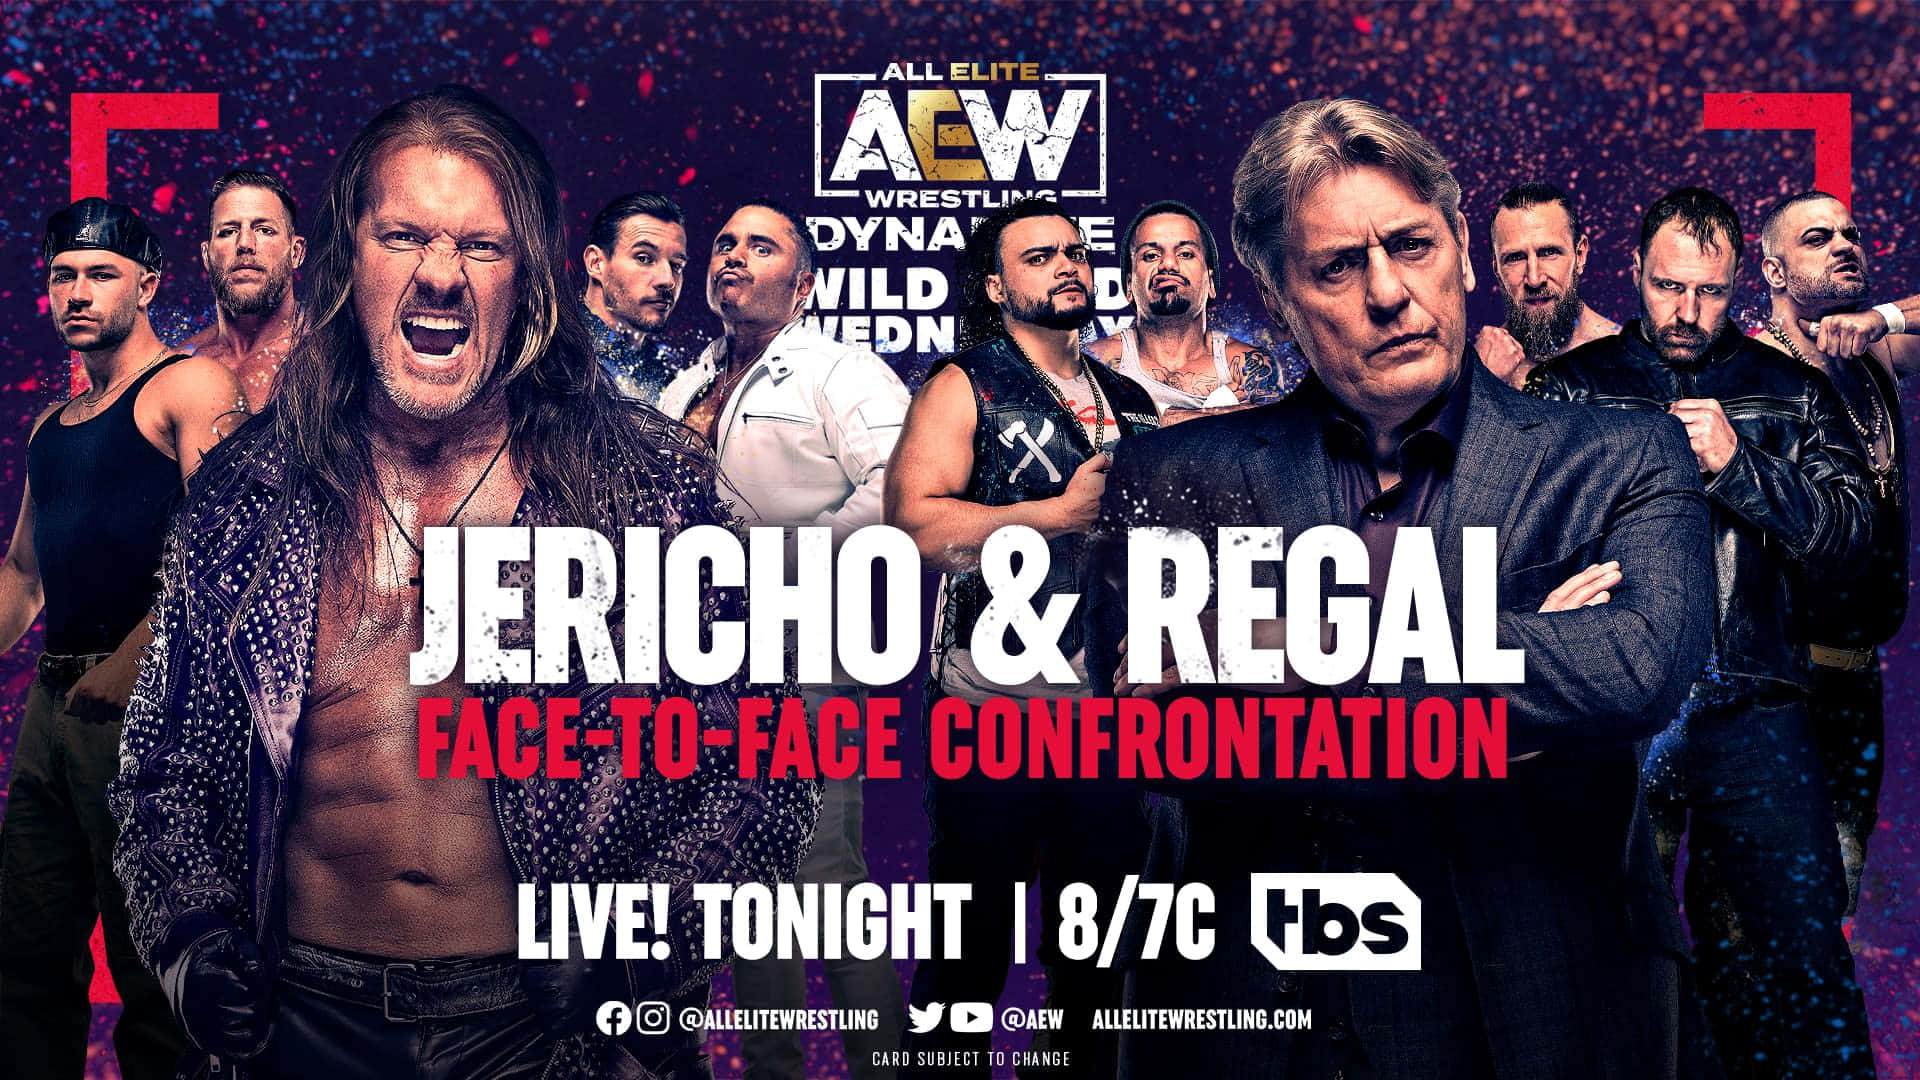 William Regal and Chris Jericho in an intense moment at AEW Dynamite. Wallpaper